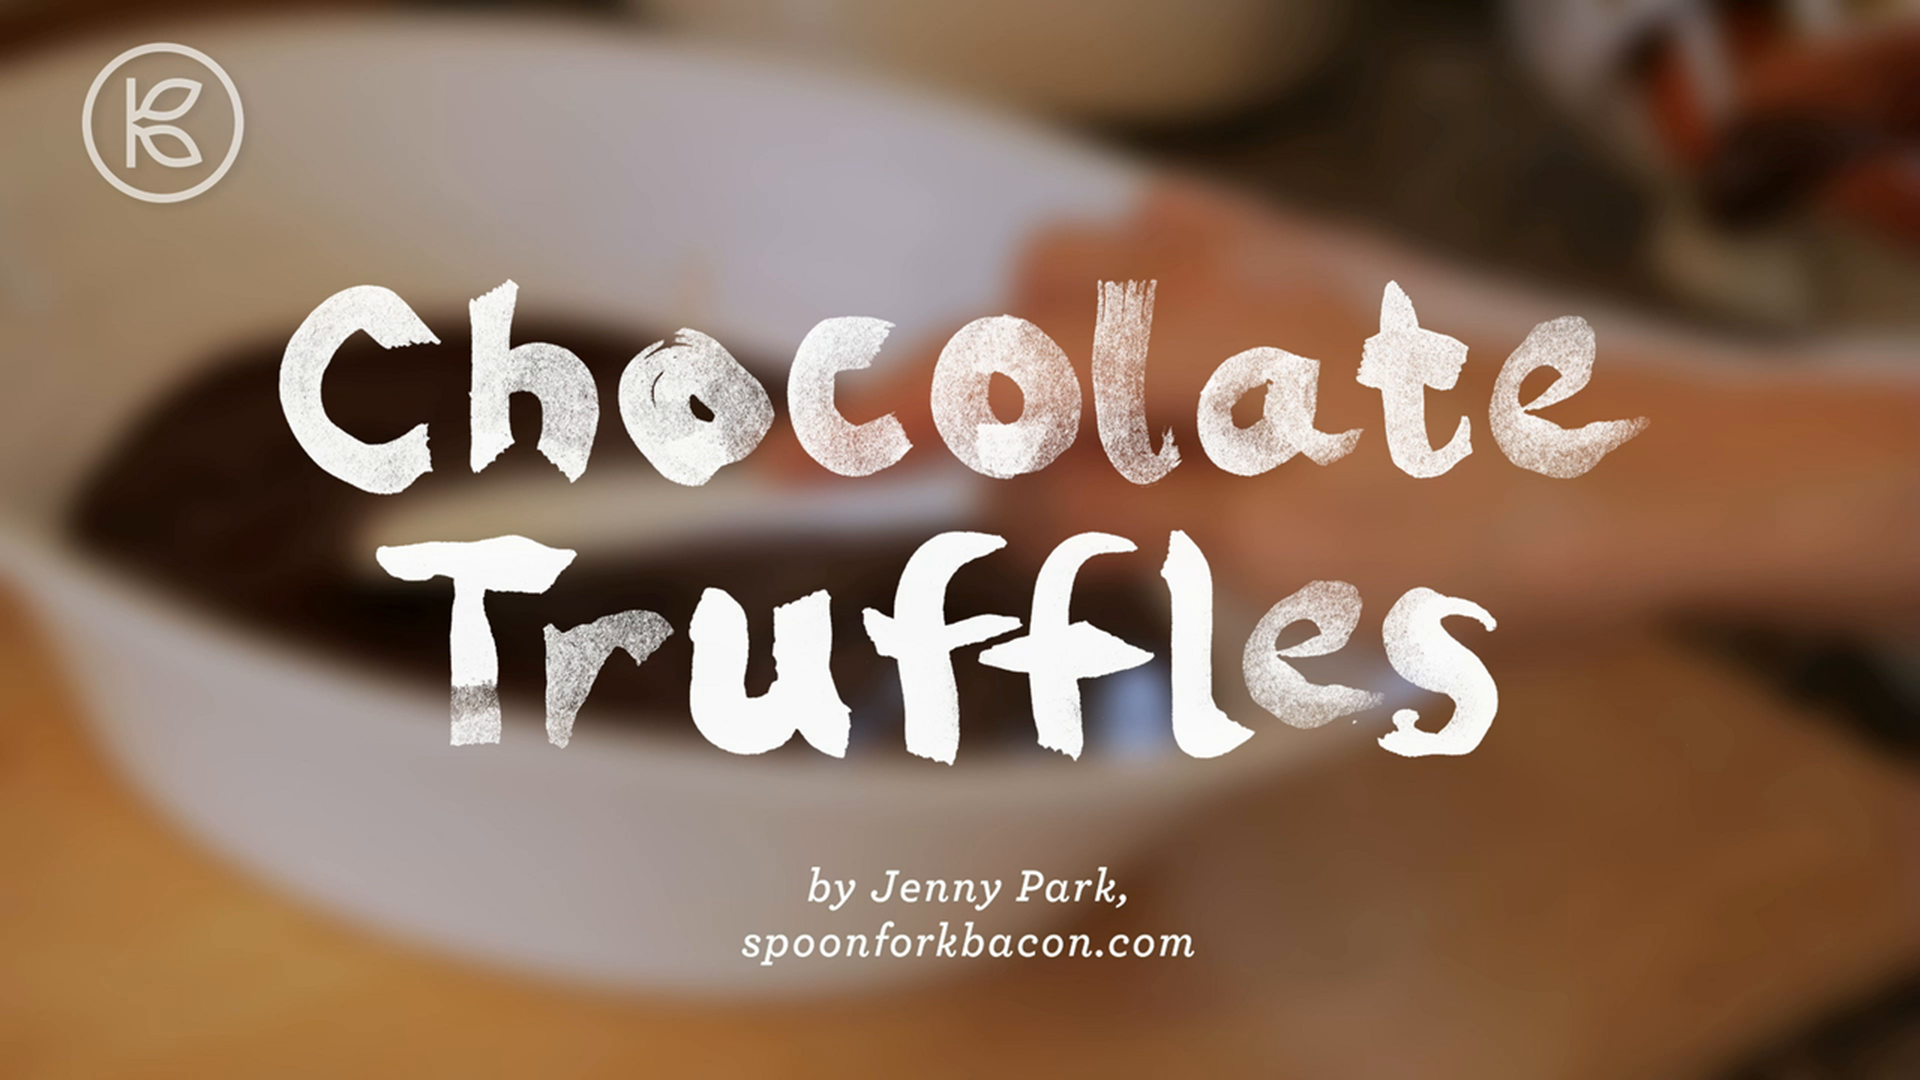 Jenny Park (http://spoonforkbacon.com): Chocolate truffles are perfect for holiday parties and make great gifts because they are so versatile. Once you've made the chocolate ball, you can coat them in just about any topping -- shredded coconut, chopped nu